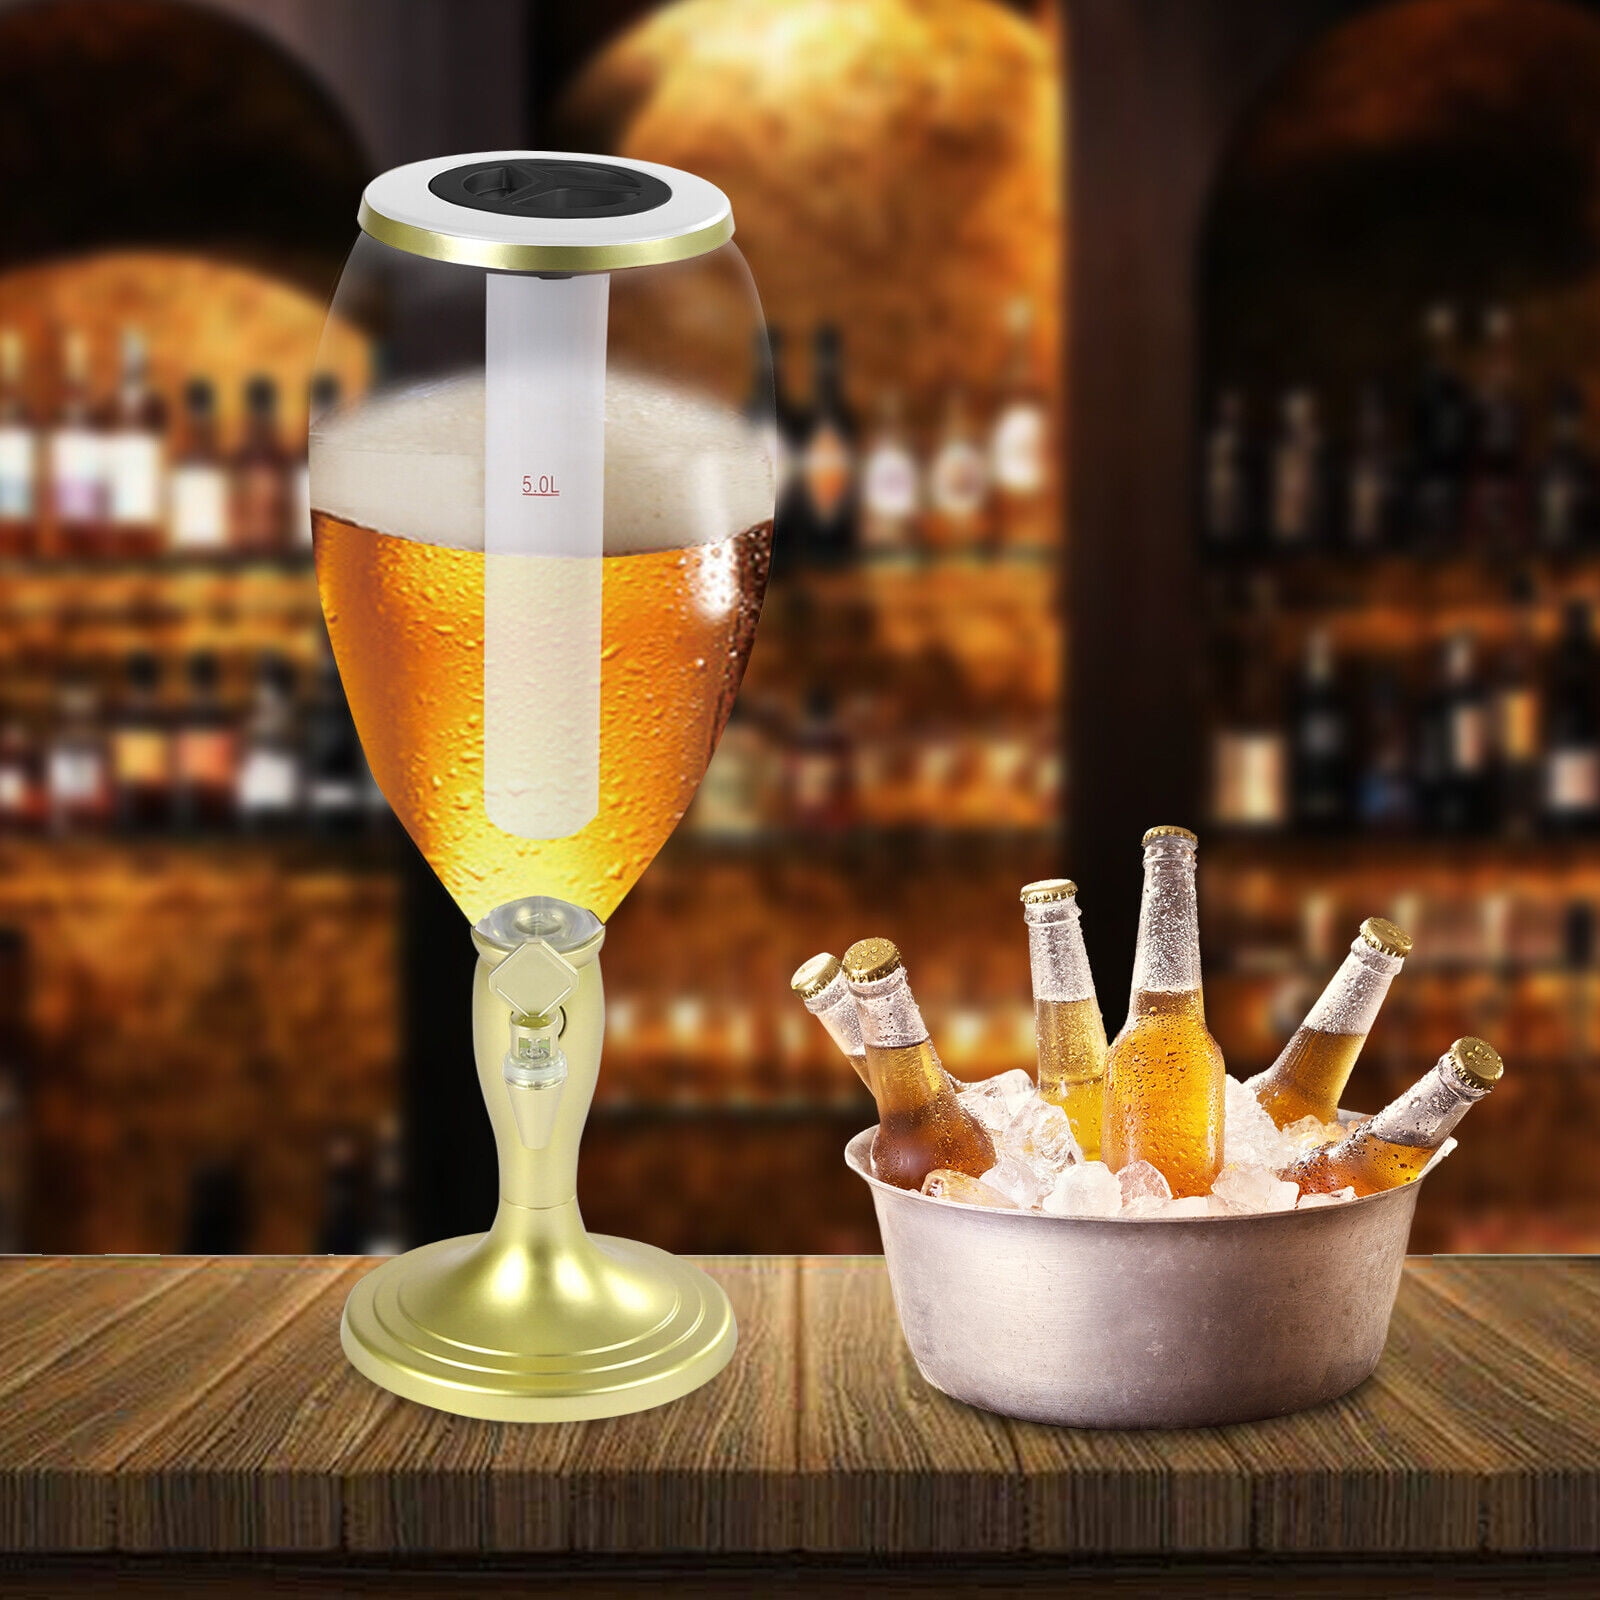 LUCKYERMORE 1 Pc Mimosa Tower Drink Dispenser 4.5 Liters Beer  Beverage Dispenser Plastic with Ice Tube Keep Cold for Birthday Party Bar:  Iced Beverage Dispensers